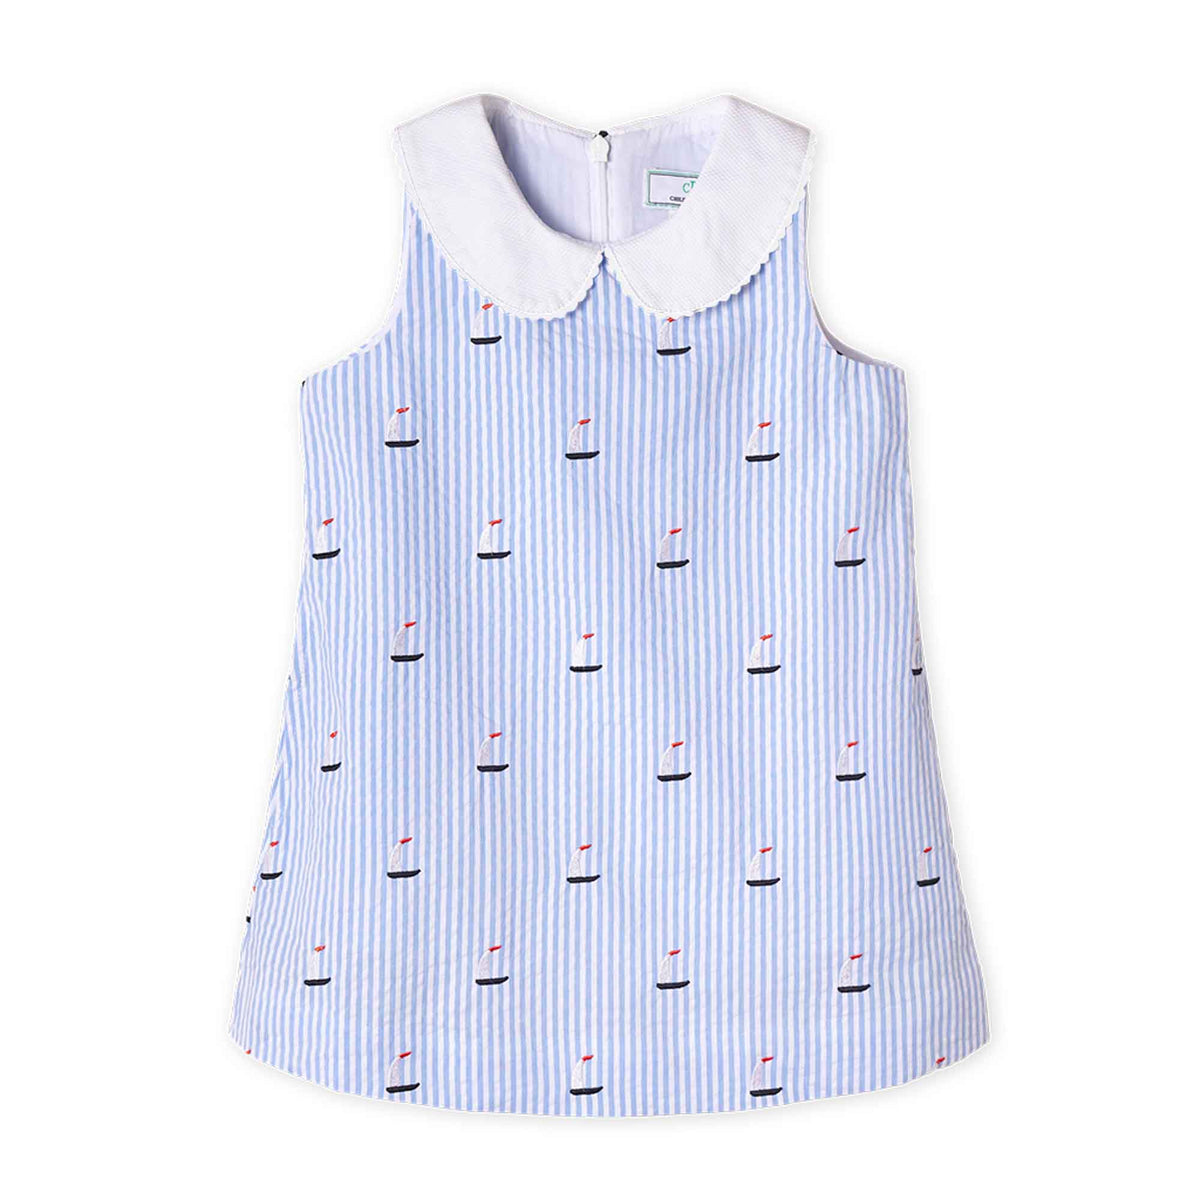 Classic and Preppy Maddie Dress, Sailboats on Blue Seersucker-Dresses, Jumpsuits and Rompers-Sailboats on Blue Seersucker-6-9M-CPC - Classic Prep Childrenswear